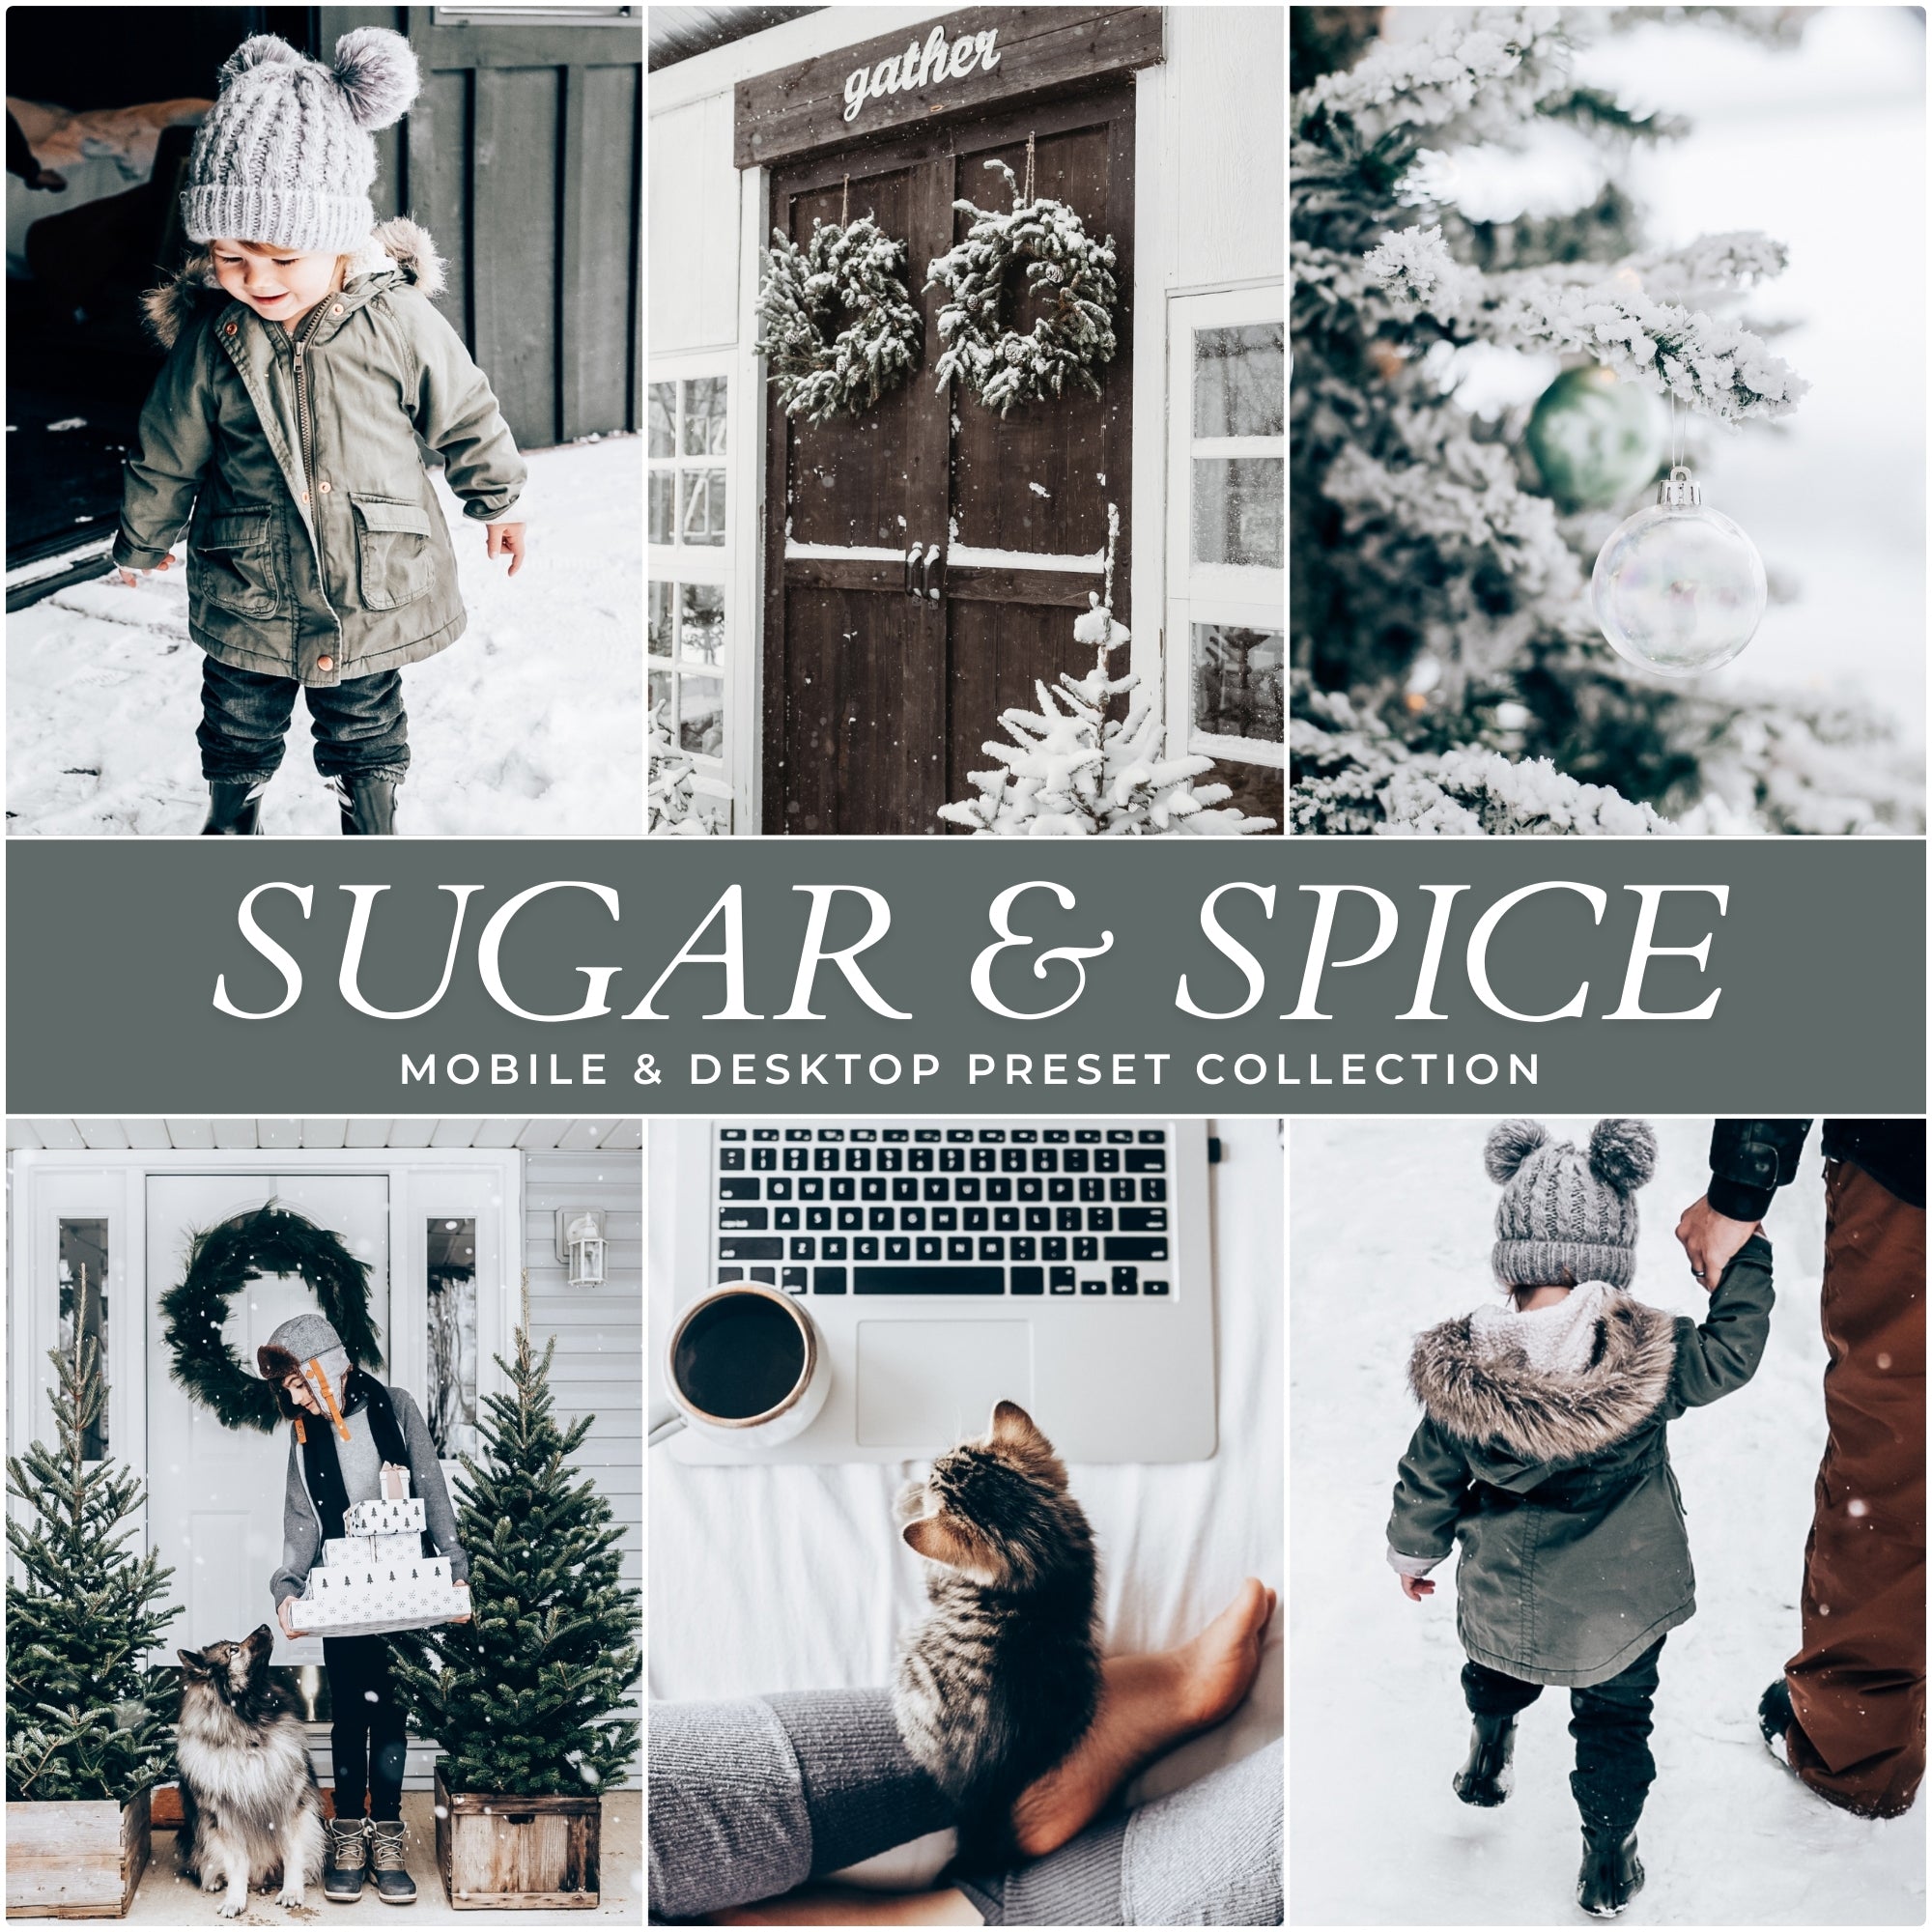 Snow Christmas Lightroom Presets The Best Photo Editing Preset Filters For Christmas And Winter Holiday Photos with Adobe Lightroom Mobile And Desktop For Photographers and Instagram Influencers By Lou And Marks Presets